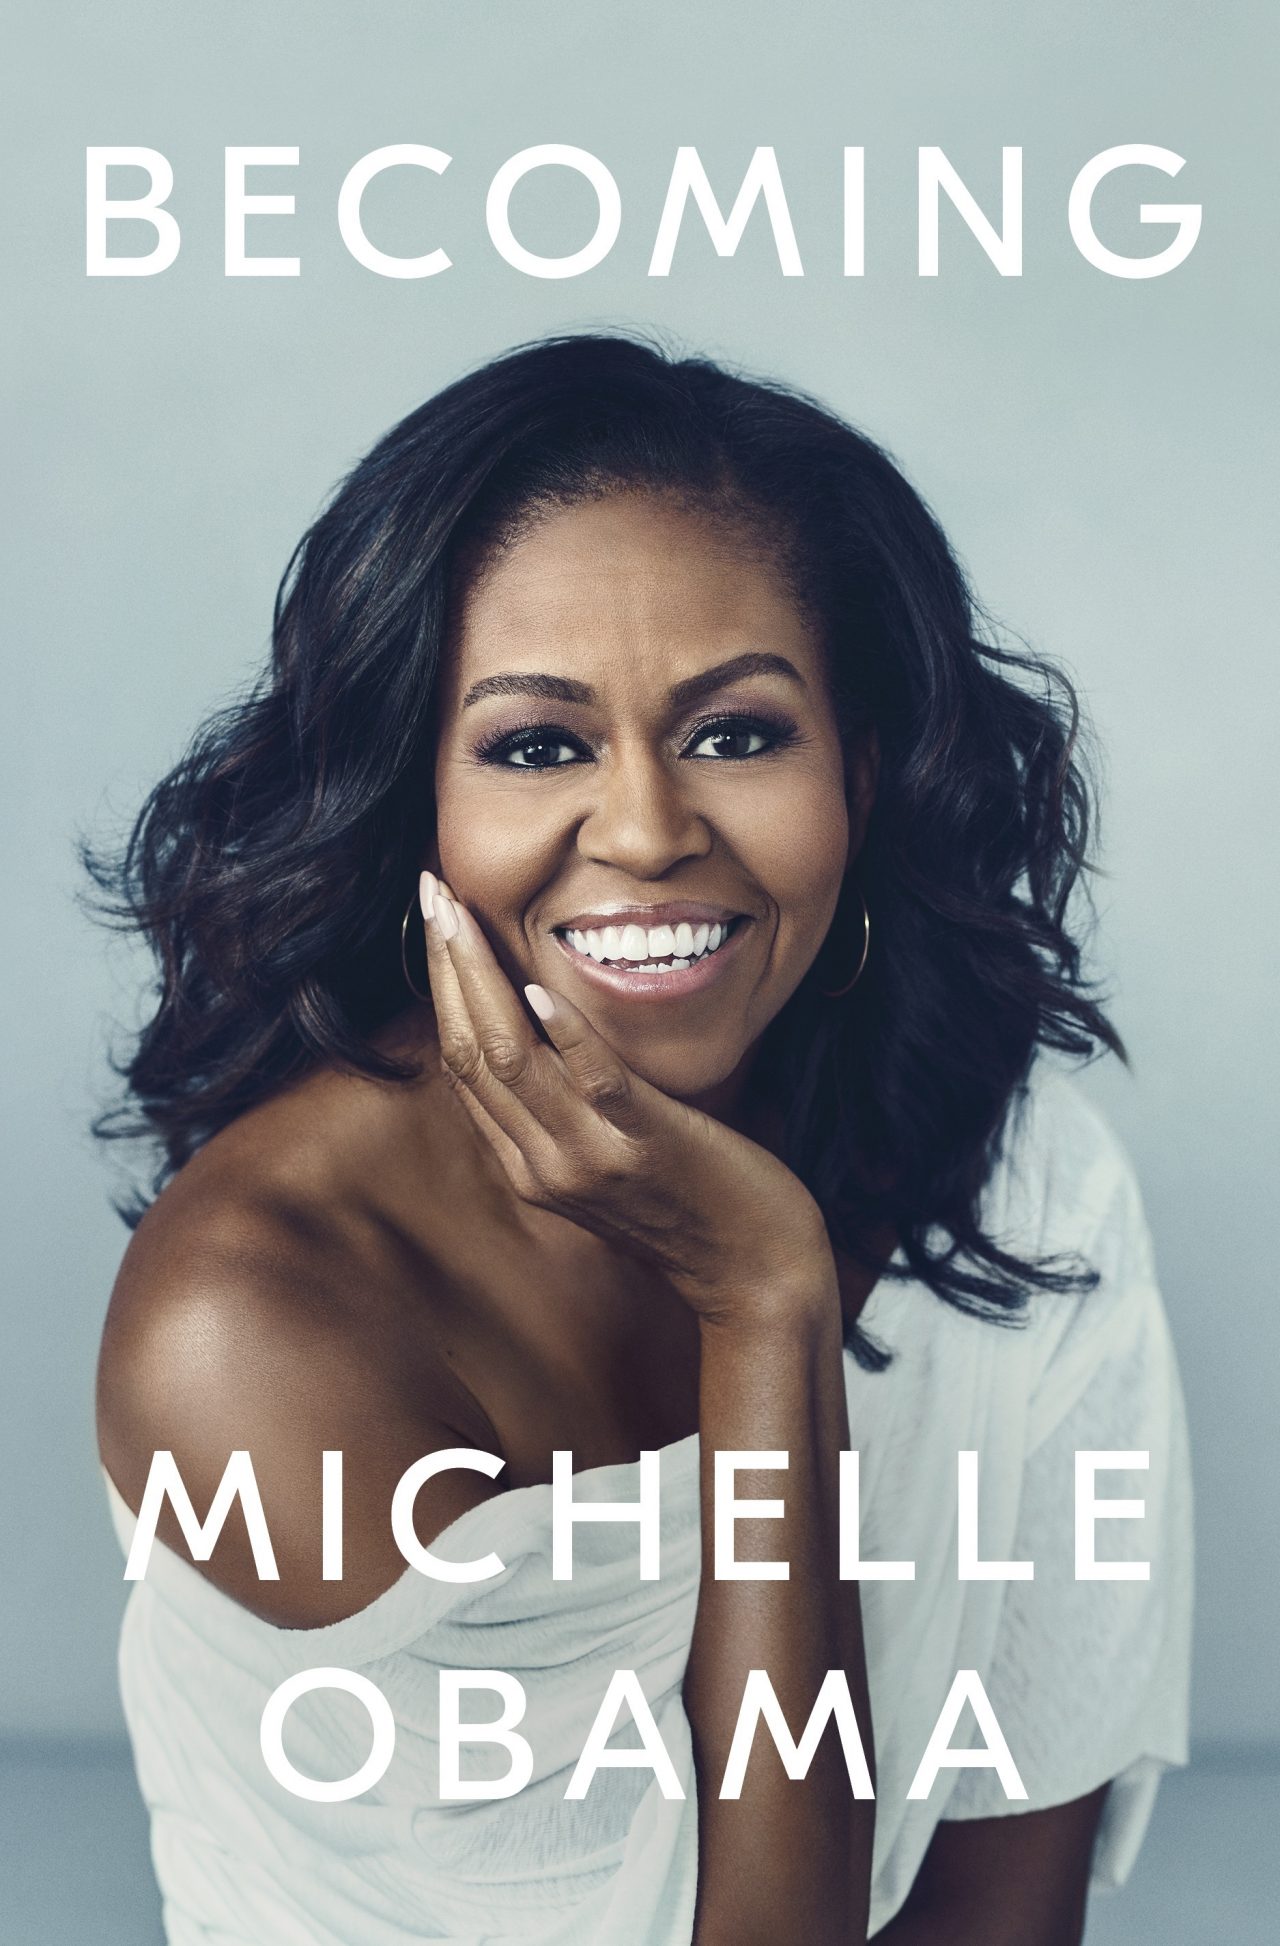 Becoming Michelle Obama-book cover